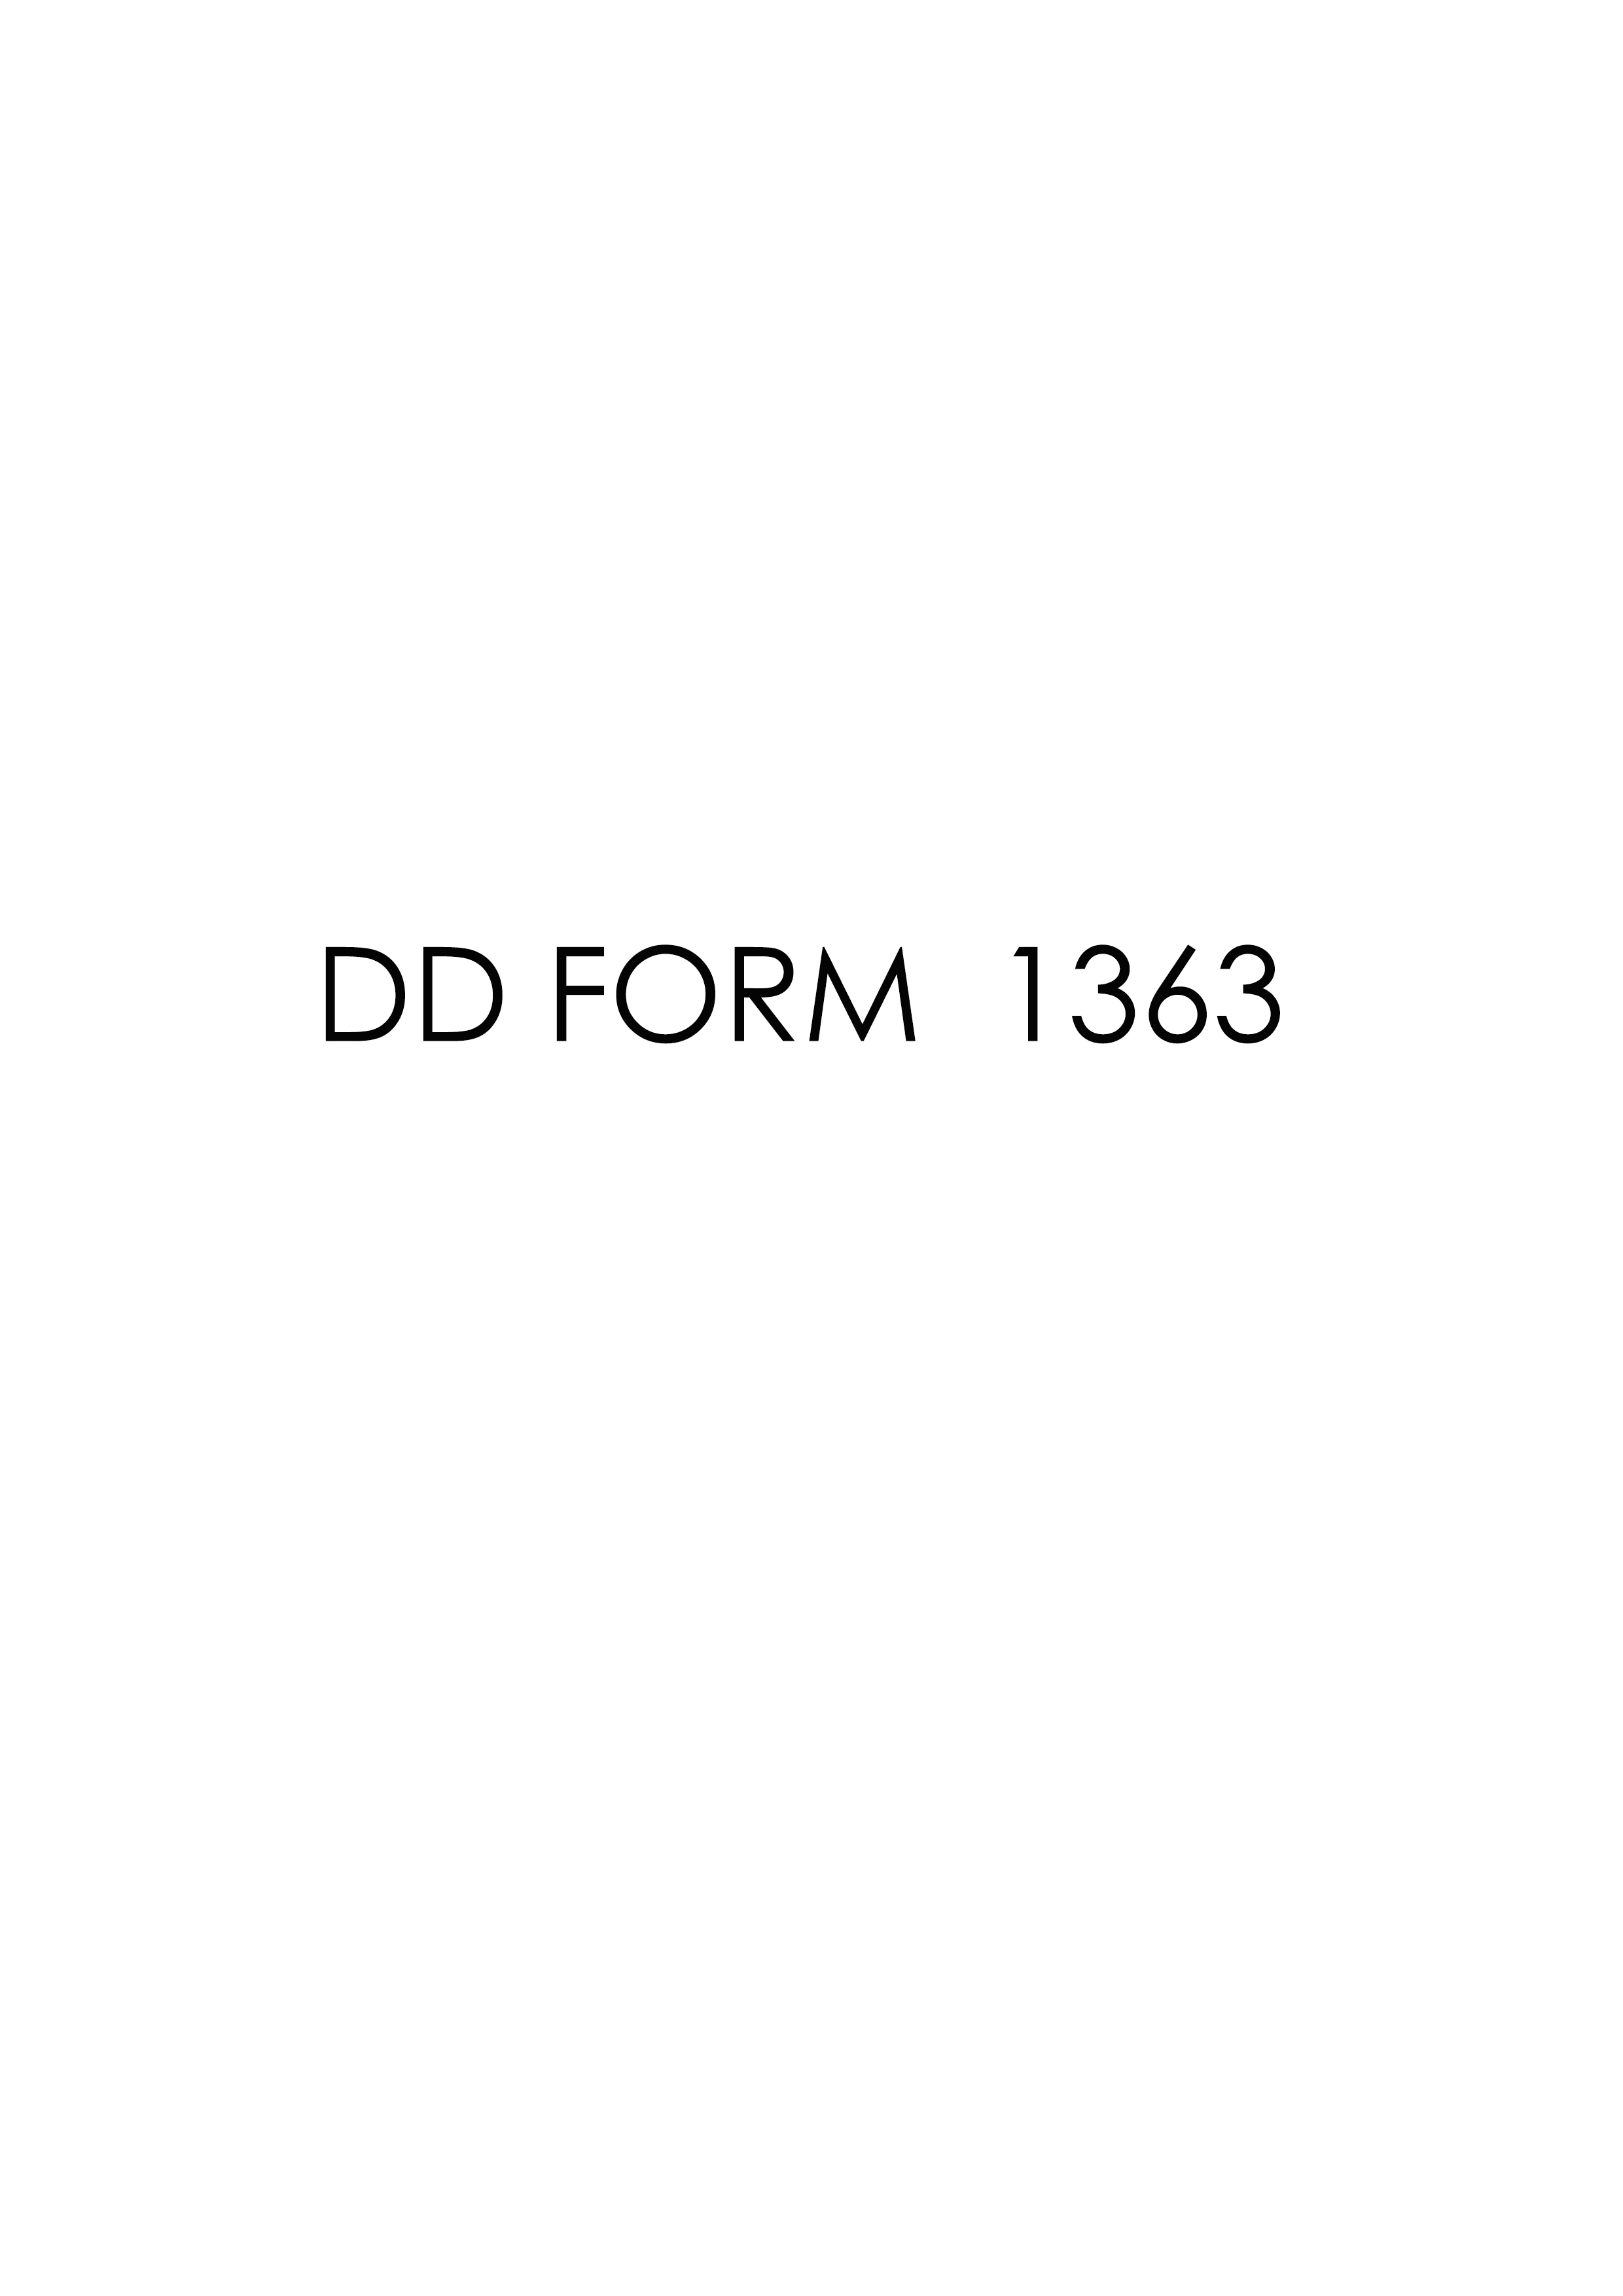 Download Fillable dd Form 1363